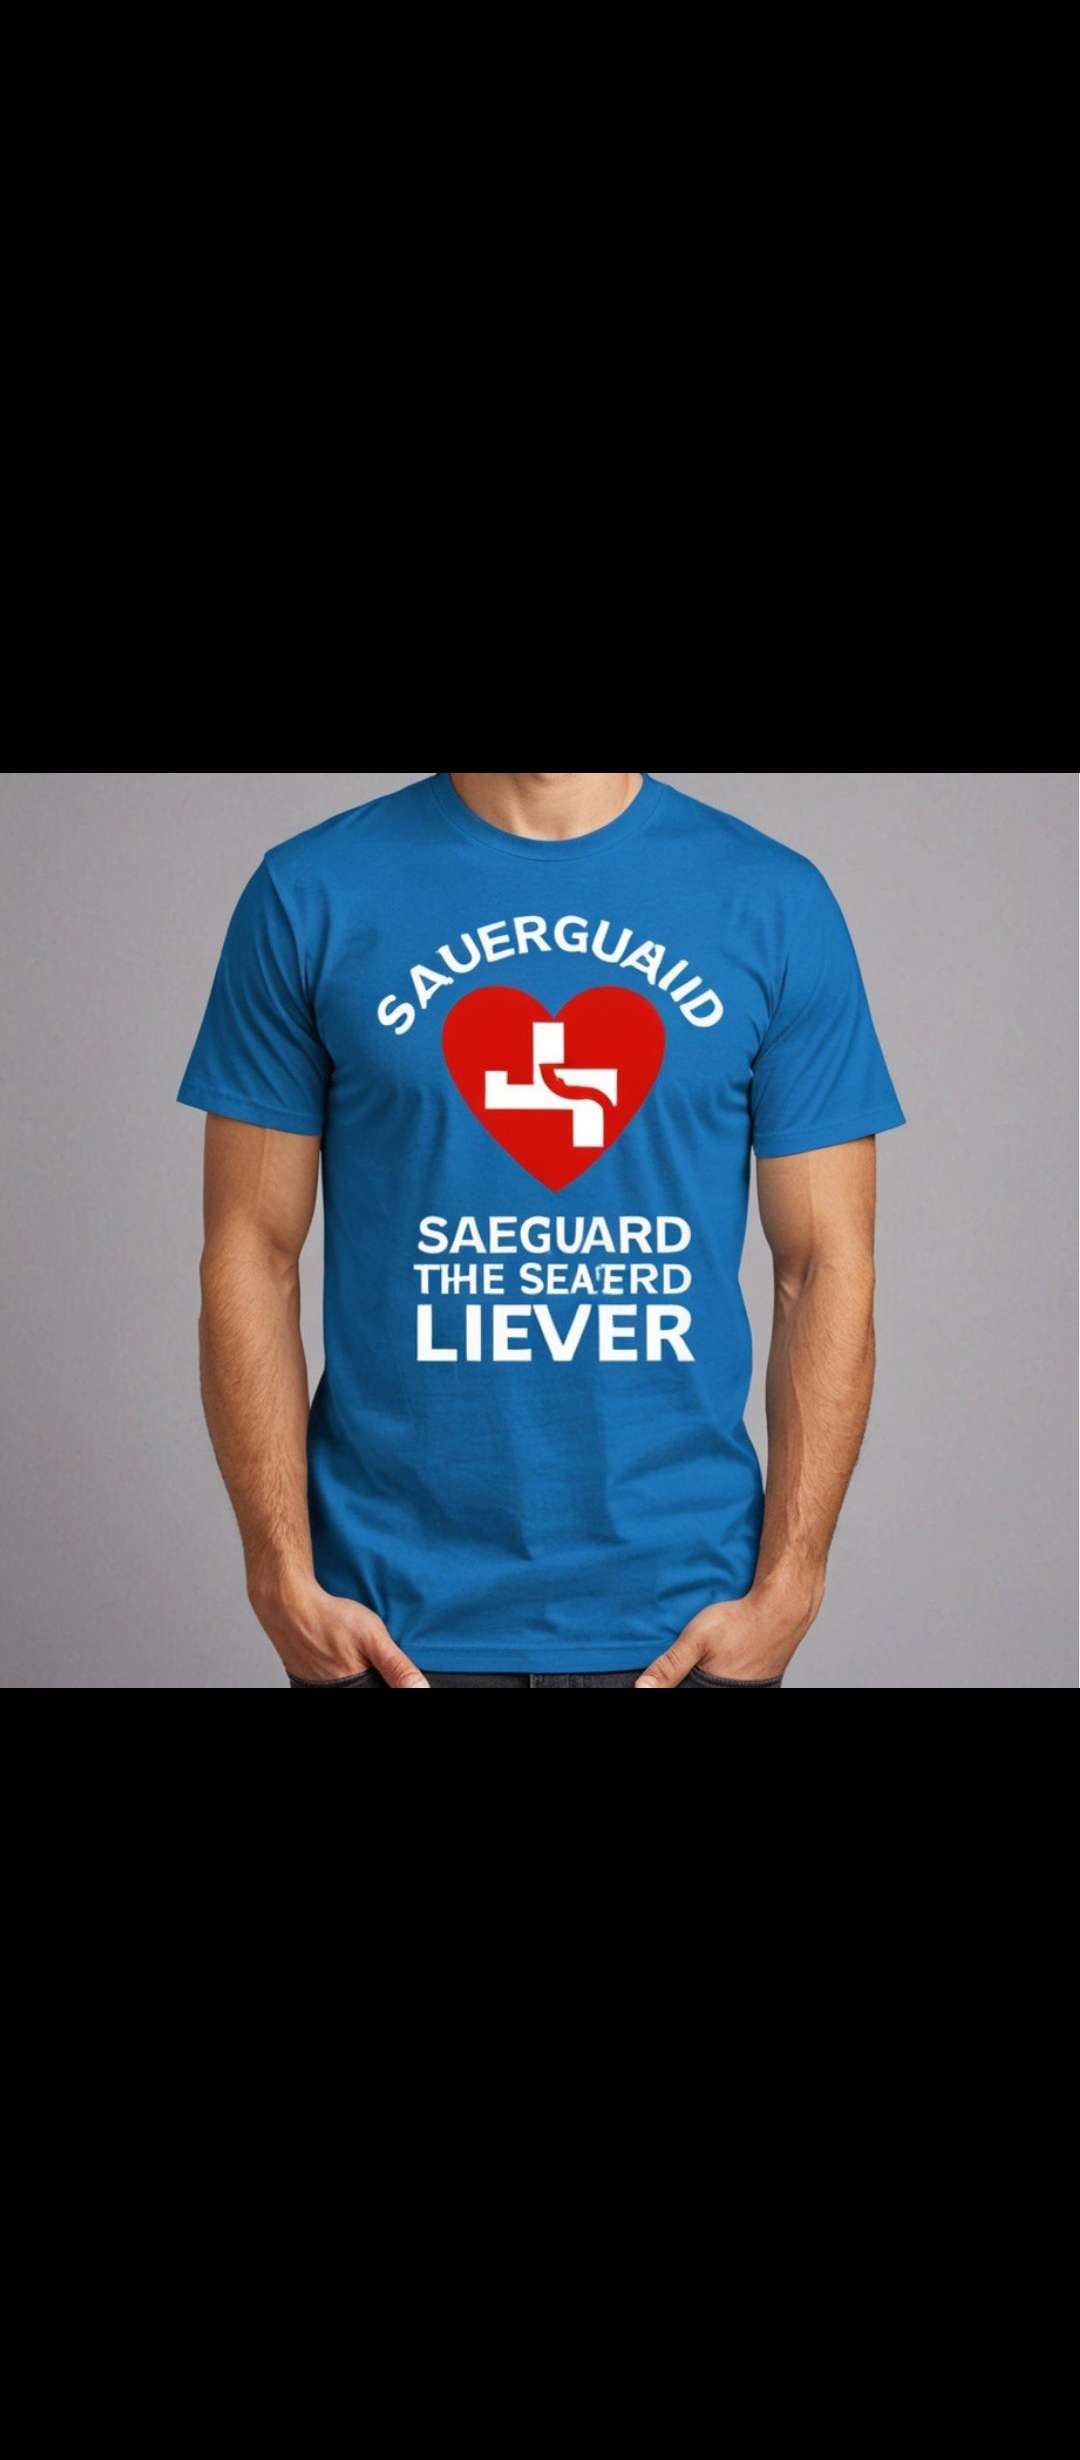 The Liver Guardian